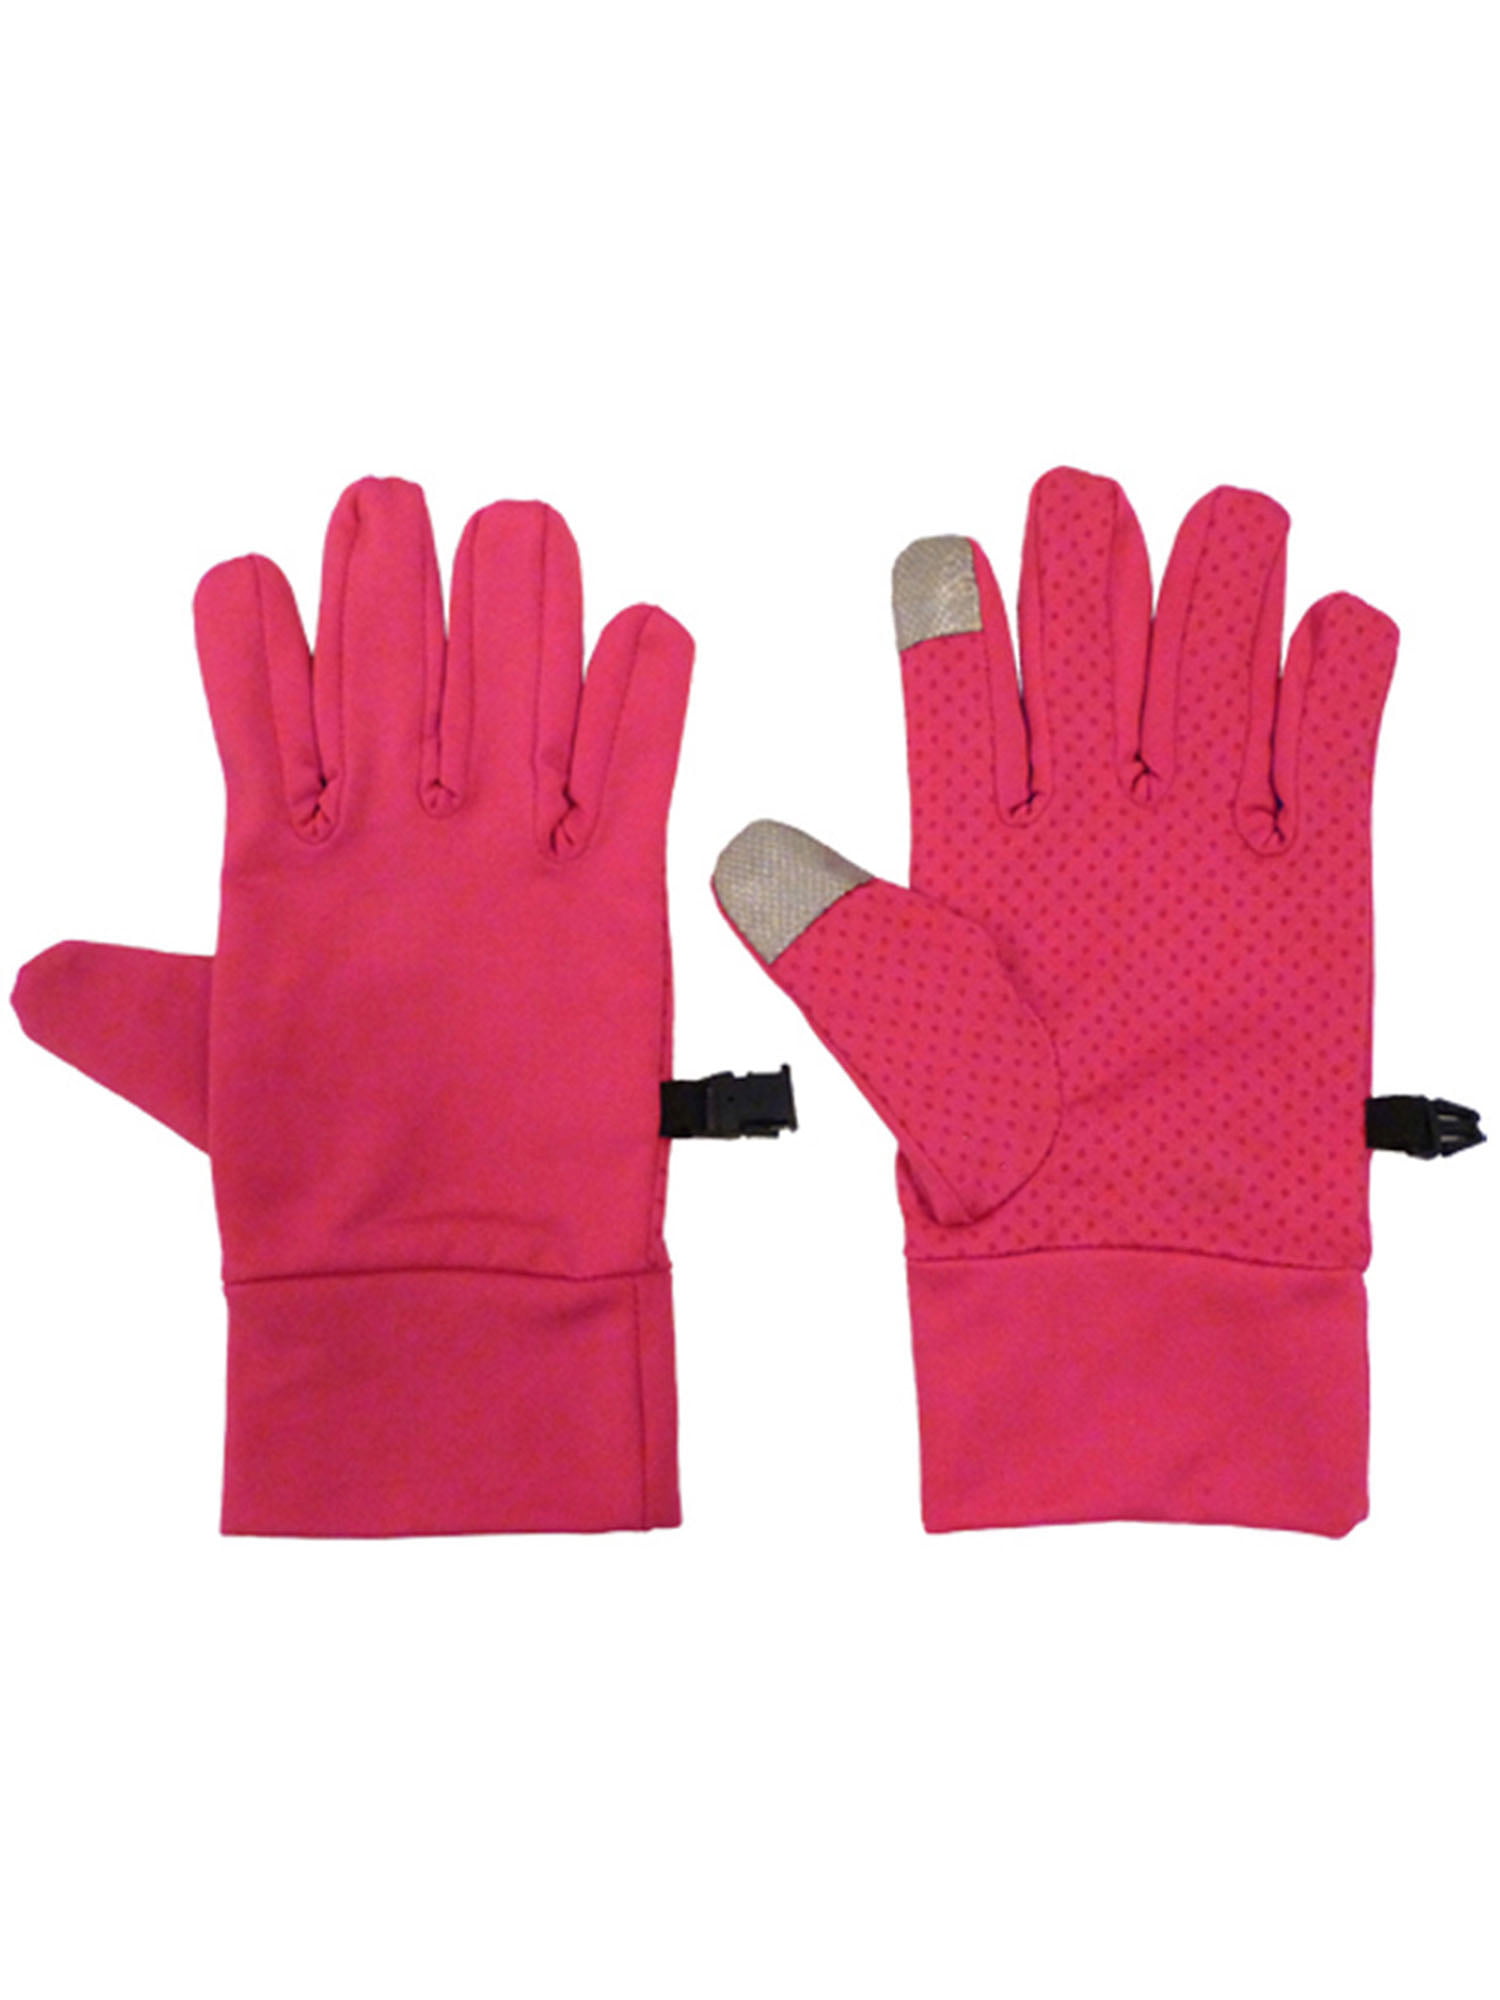 Smart Touch Spandex Gloves Compatible with iPhone,iPad,iPod，Touch-Screen Devices 